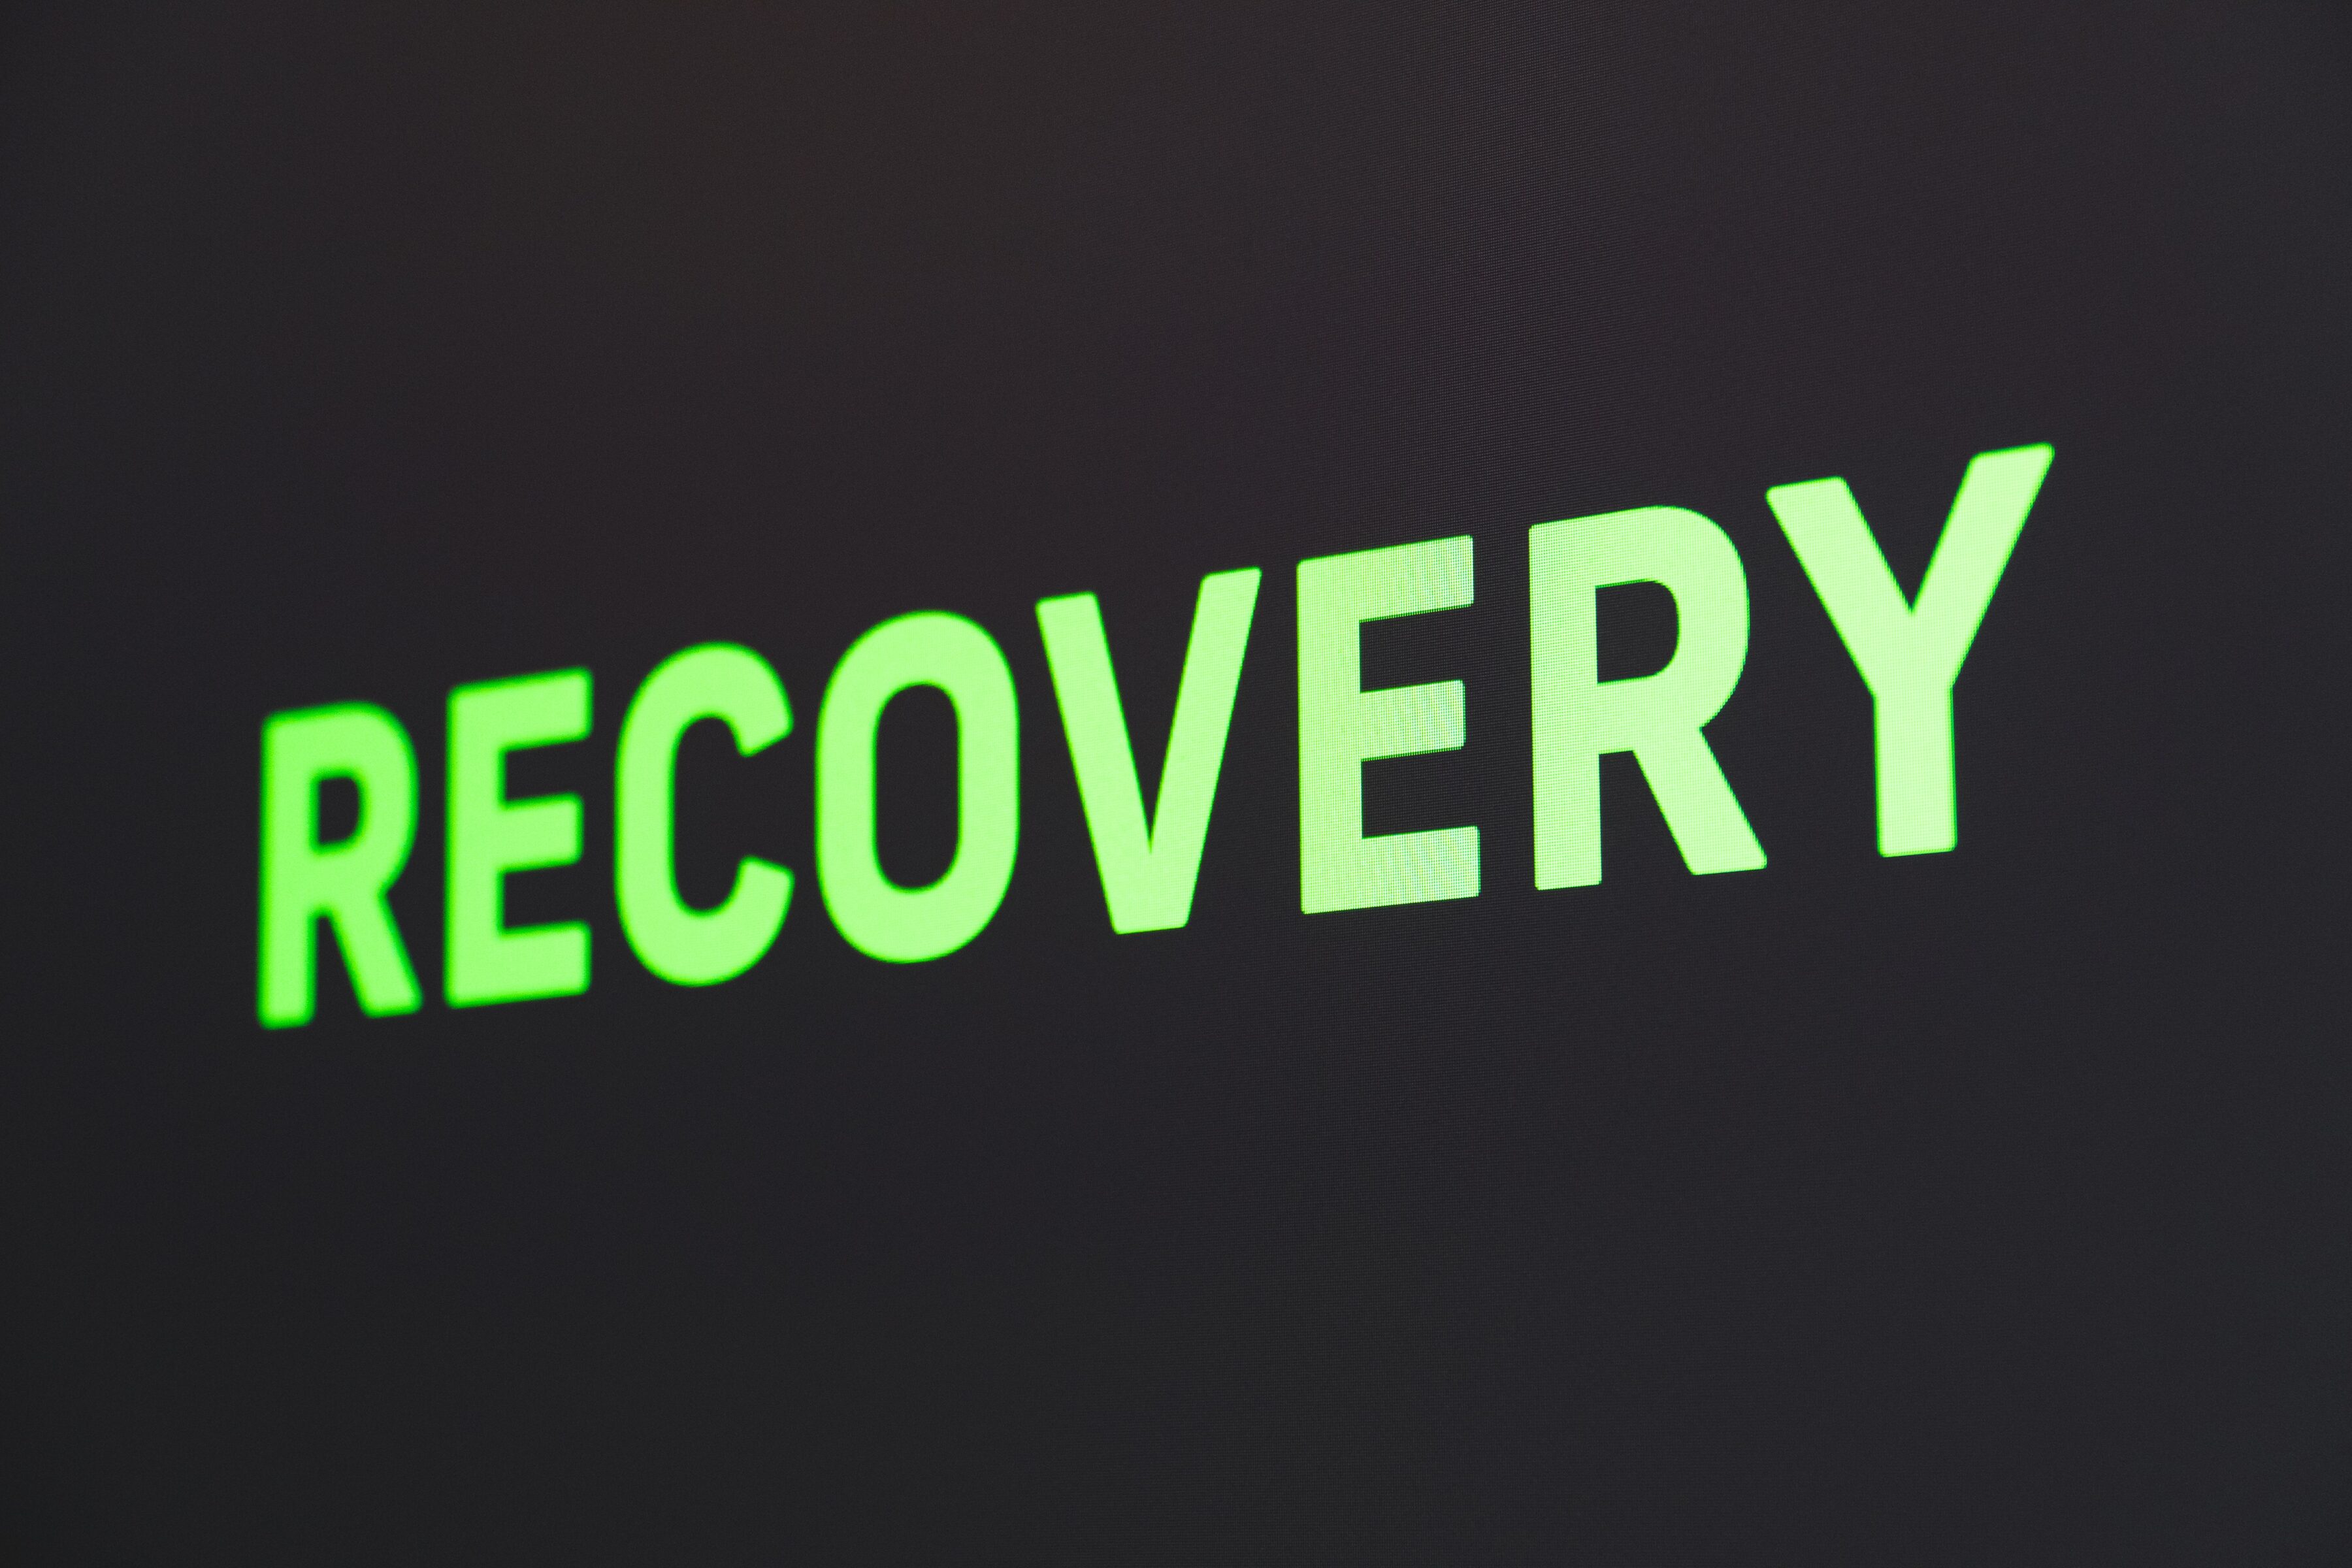 An image of the word recovery in green lettering on a black background.